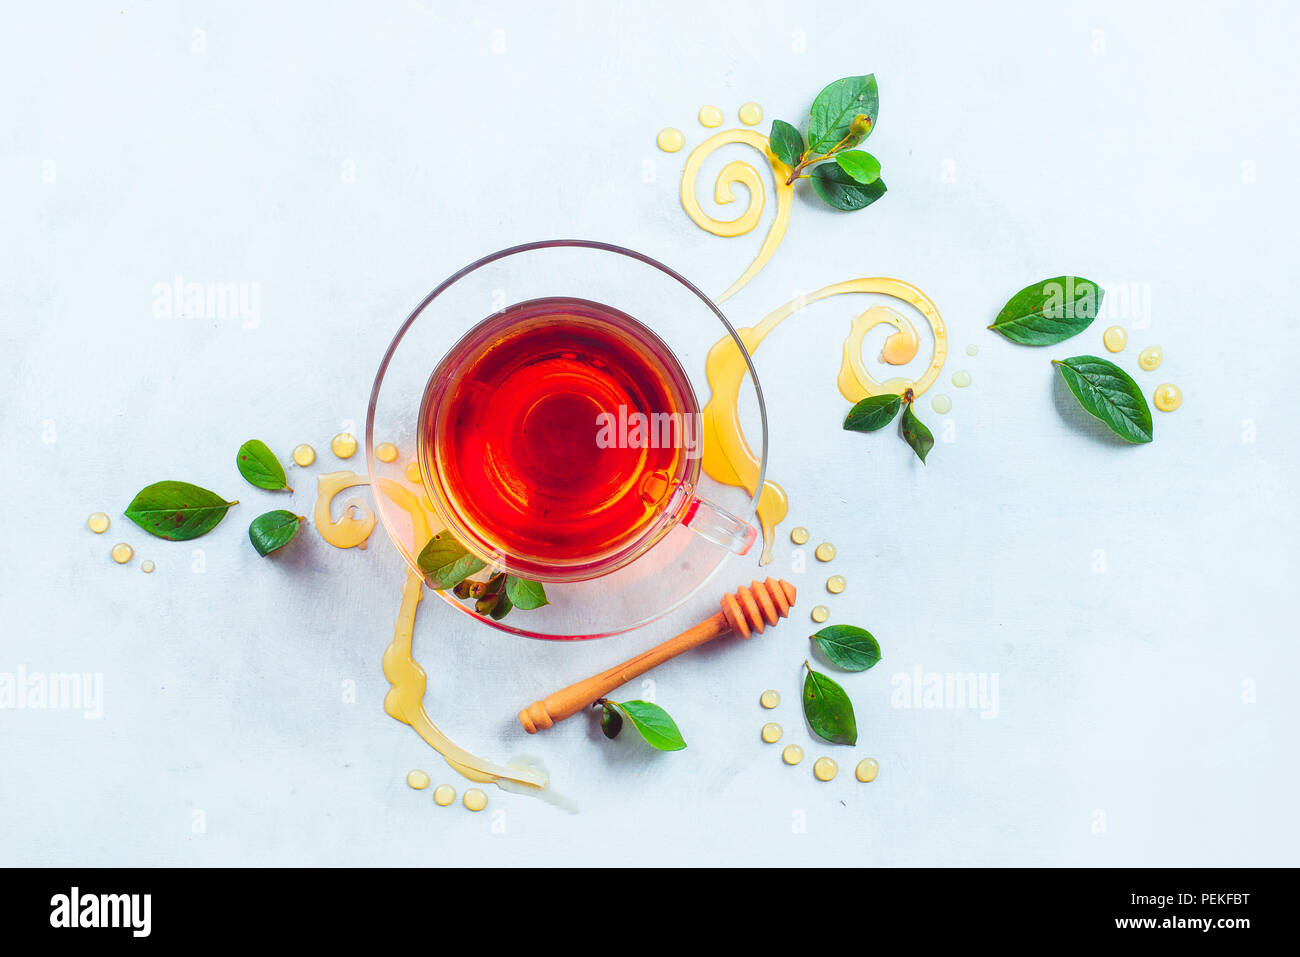 Glass cup of tea with decorative honey swirls and green leaves. Home remedies flat lay on a white background with copy space Stock Photo